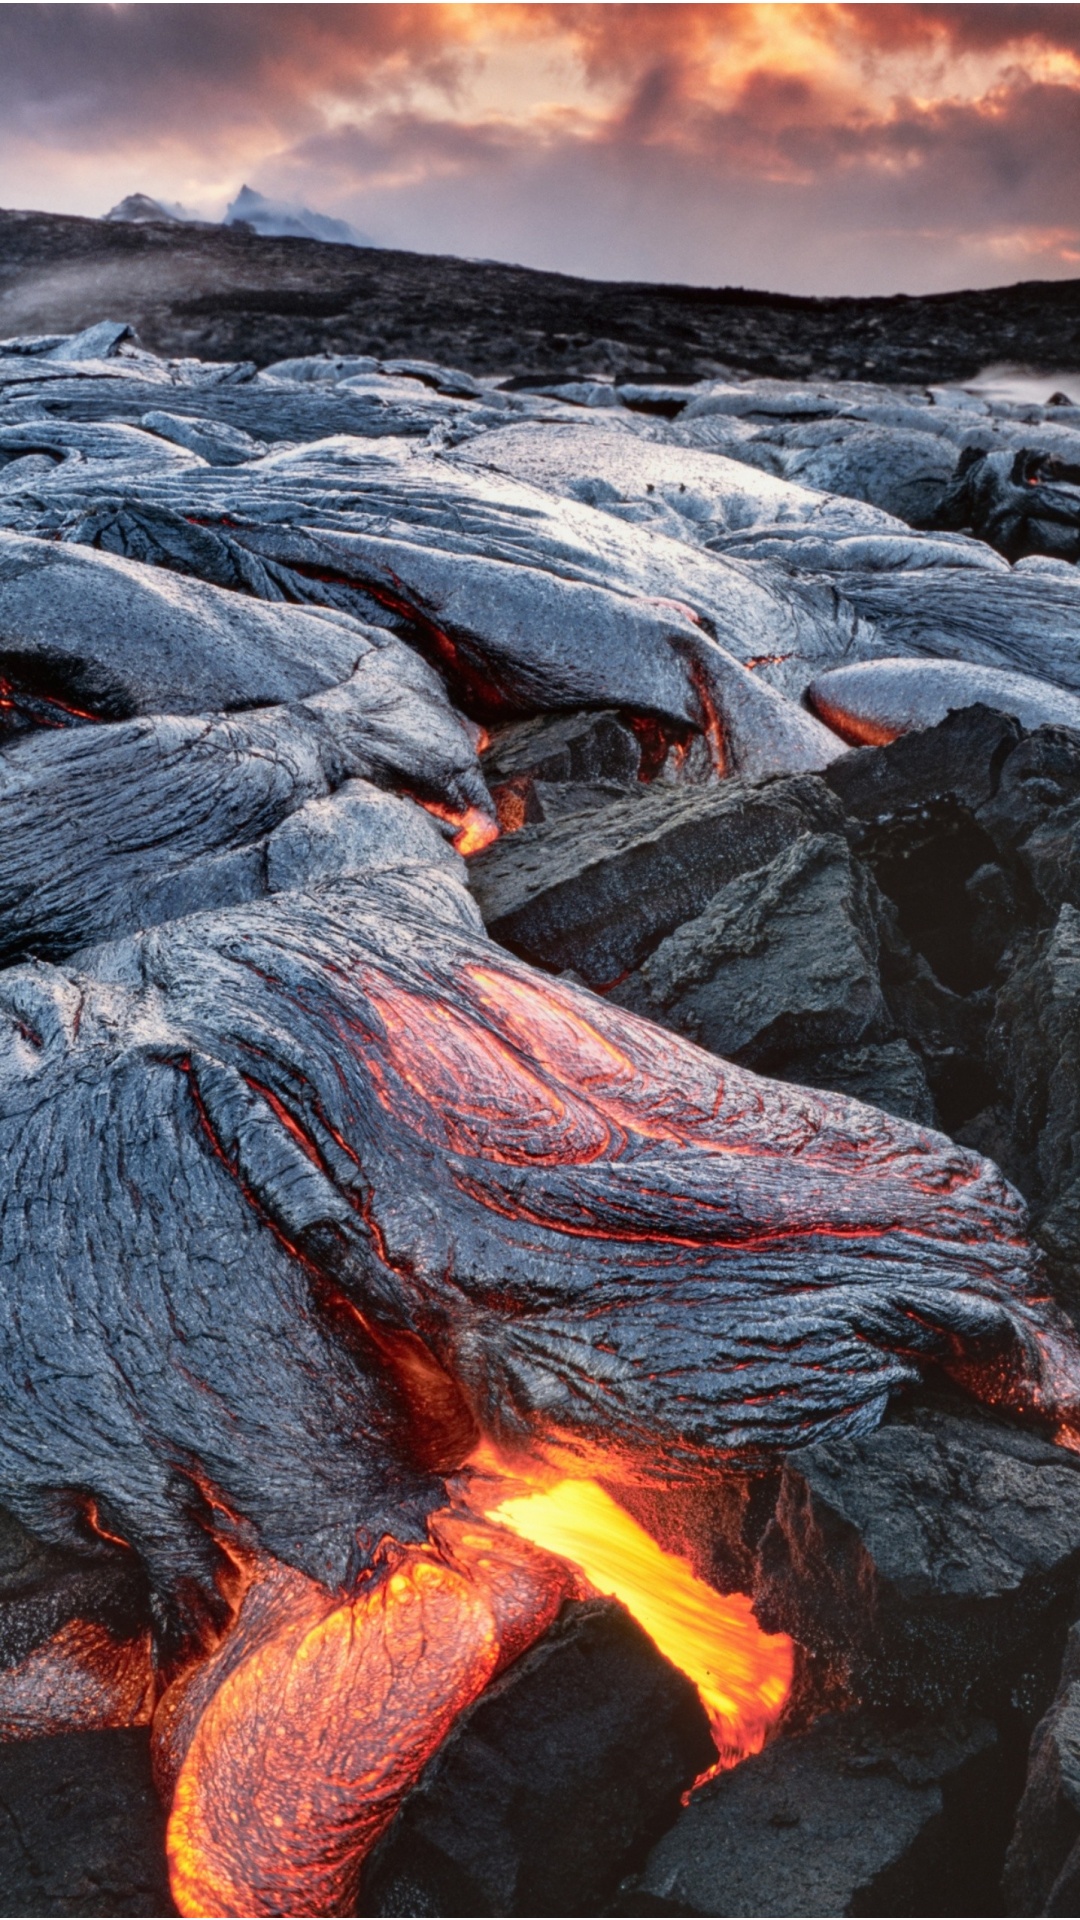 hd wallpapers for lenovo a7000,geological phenomenon,lava,rock,water,geology